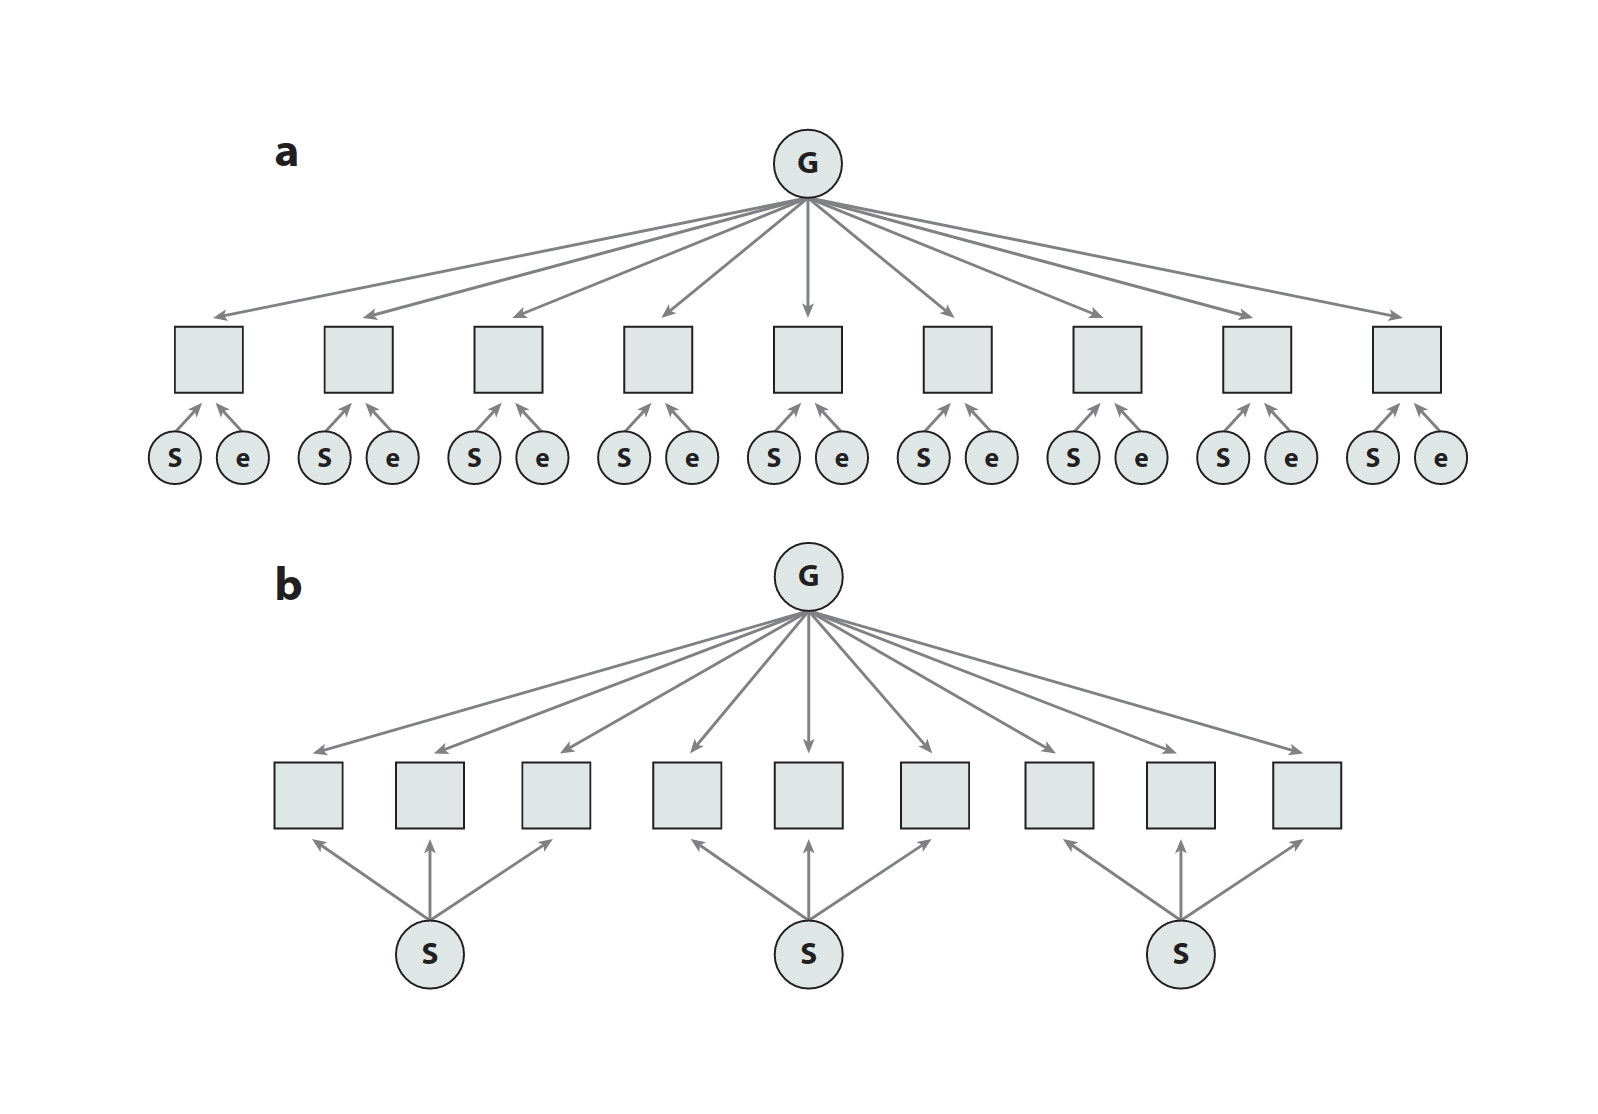 Figure 1: Hierarchical and related models. (a) Spearman’s (1904a, 1904b) 2-factor model, a precursor to hierarchical and bifactor models. The 2-factor model includes a general factor (G) as well as systematic specific factors (S) and random error factors (e). As originally formulated, Spearman’s 2-factor model cannot be estimated, but it established the idea of a superordinate general factor plus subordinate specific factors that account for systematic residual influences not accounted for by the general factor. (b) The hierarchical or bifactor model, which includes superordinate general factors (G) as well as subordinate specific factors (S); error factors are not shown. Bifactor models are a subtype of hierarchical model with one superordinate factor and multiple subordinate factors. The 2-factor model and hierarchical model are examples of top-down models, in that subordinate factors instantiate residual effects that are unexplained by the superordinate factor.